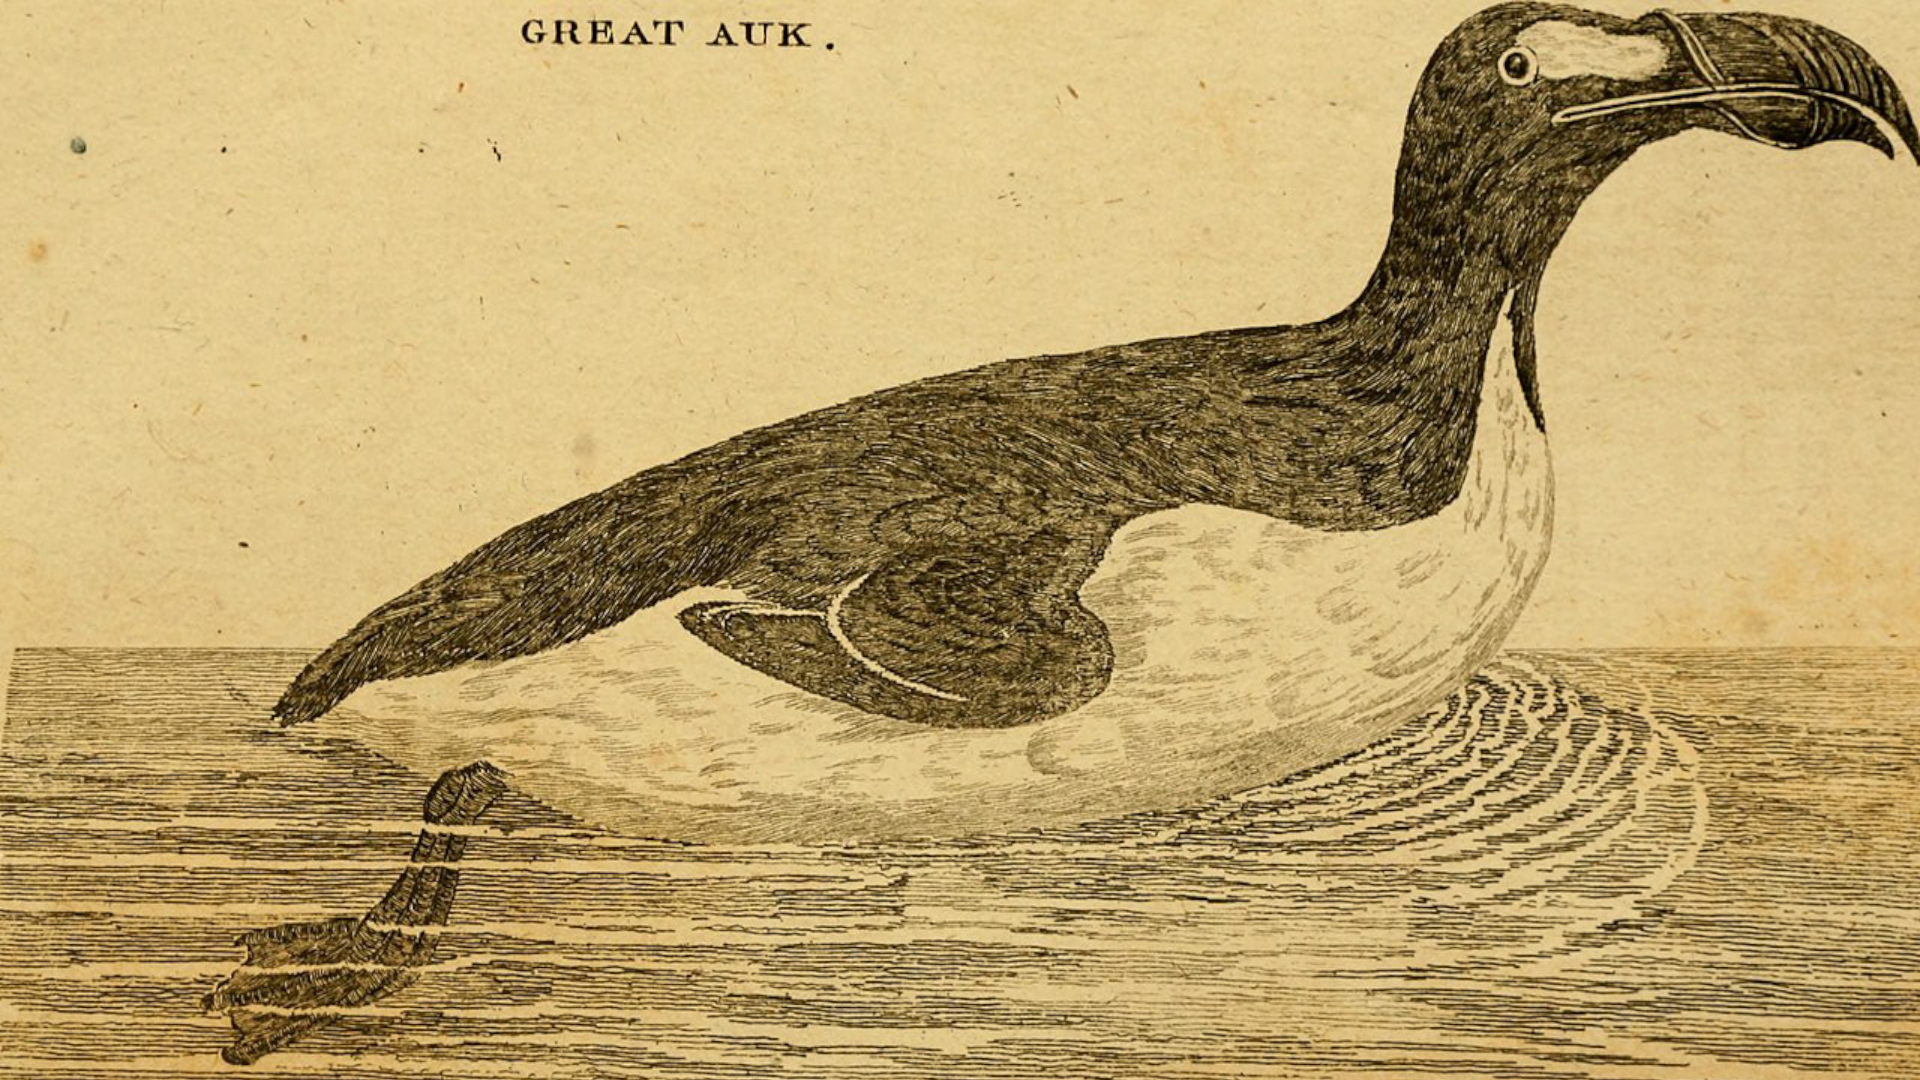 great auk-natural selection-richard nelson-darwin then and now